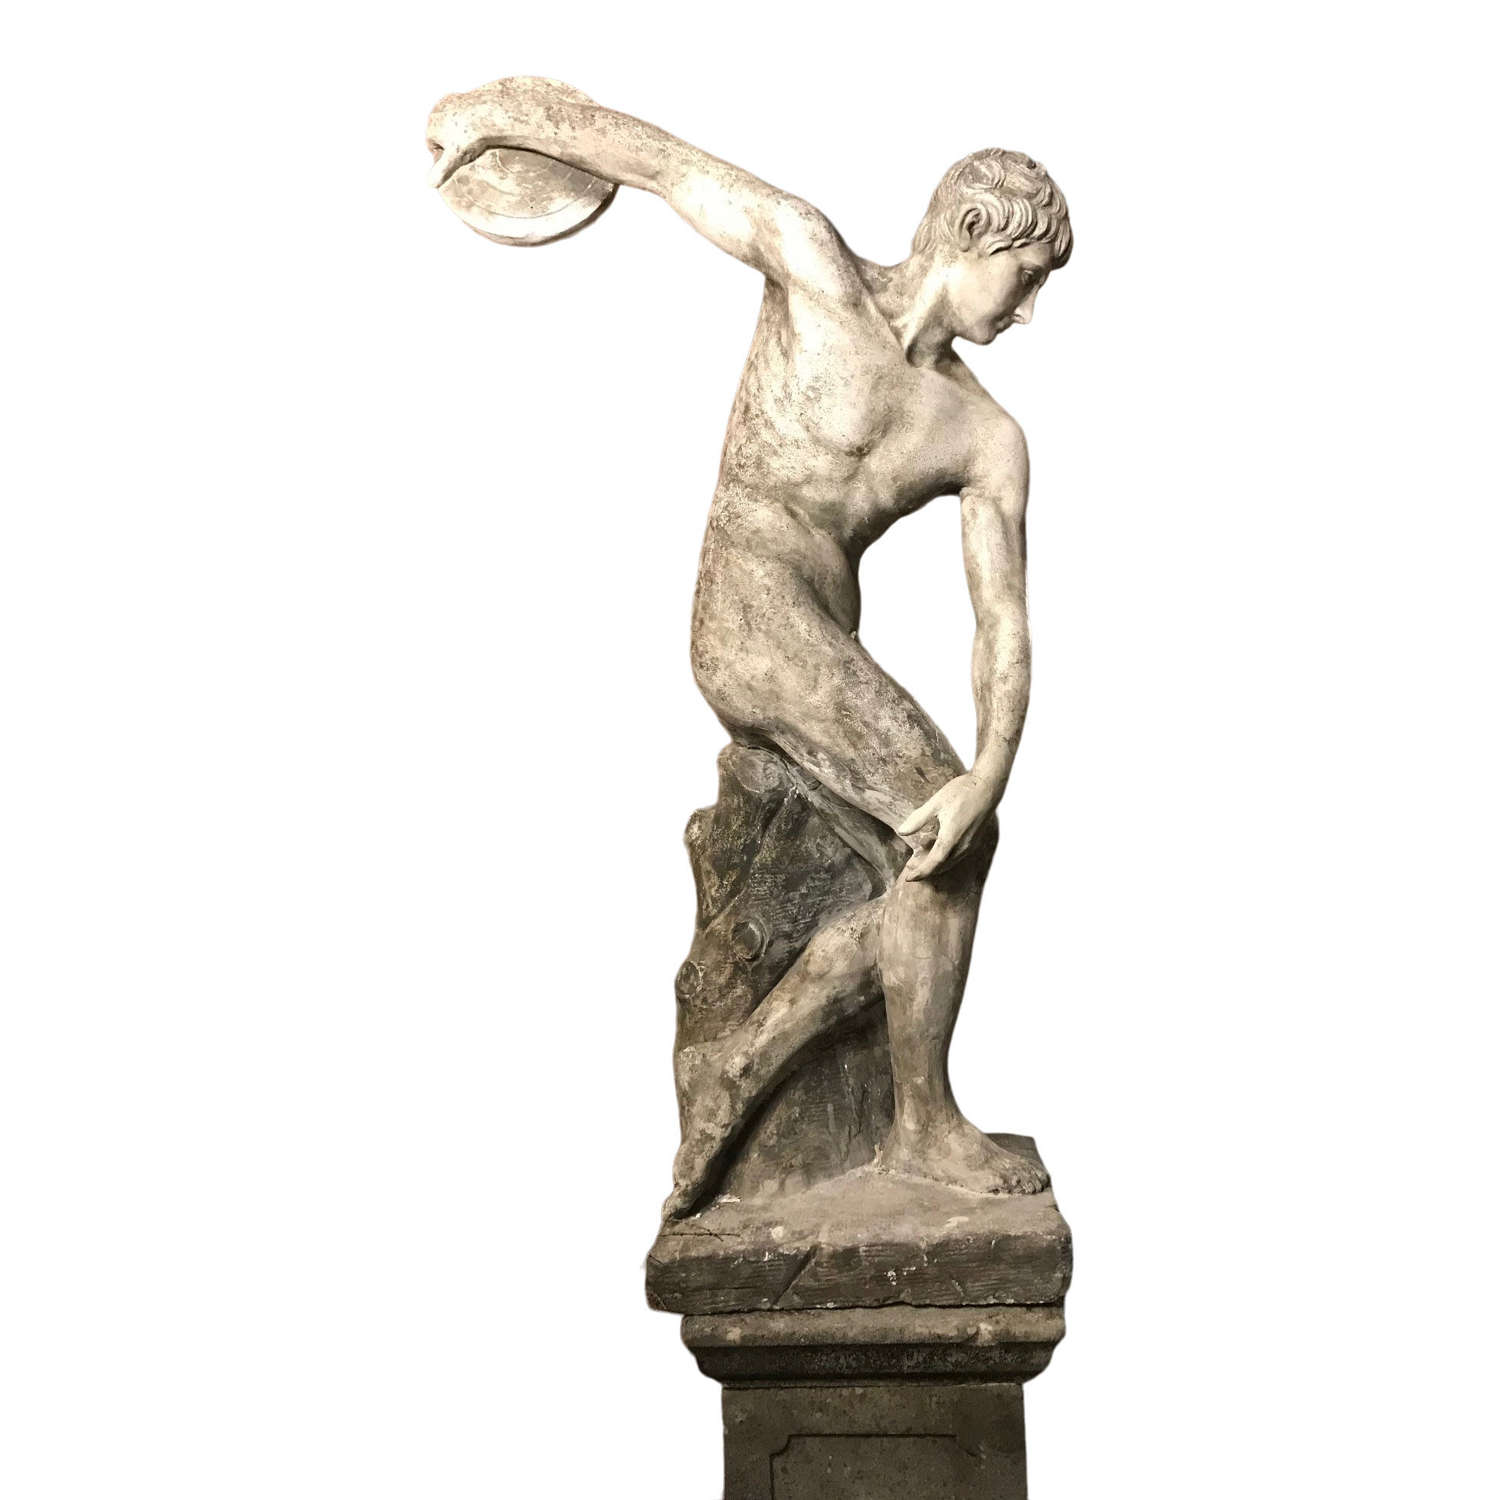 AFTER THE ANTIQUE, A LARGE 20th C PLASTER FIGURE OF A DISCUS THROWER